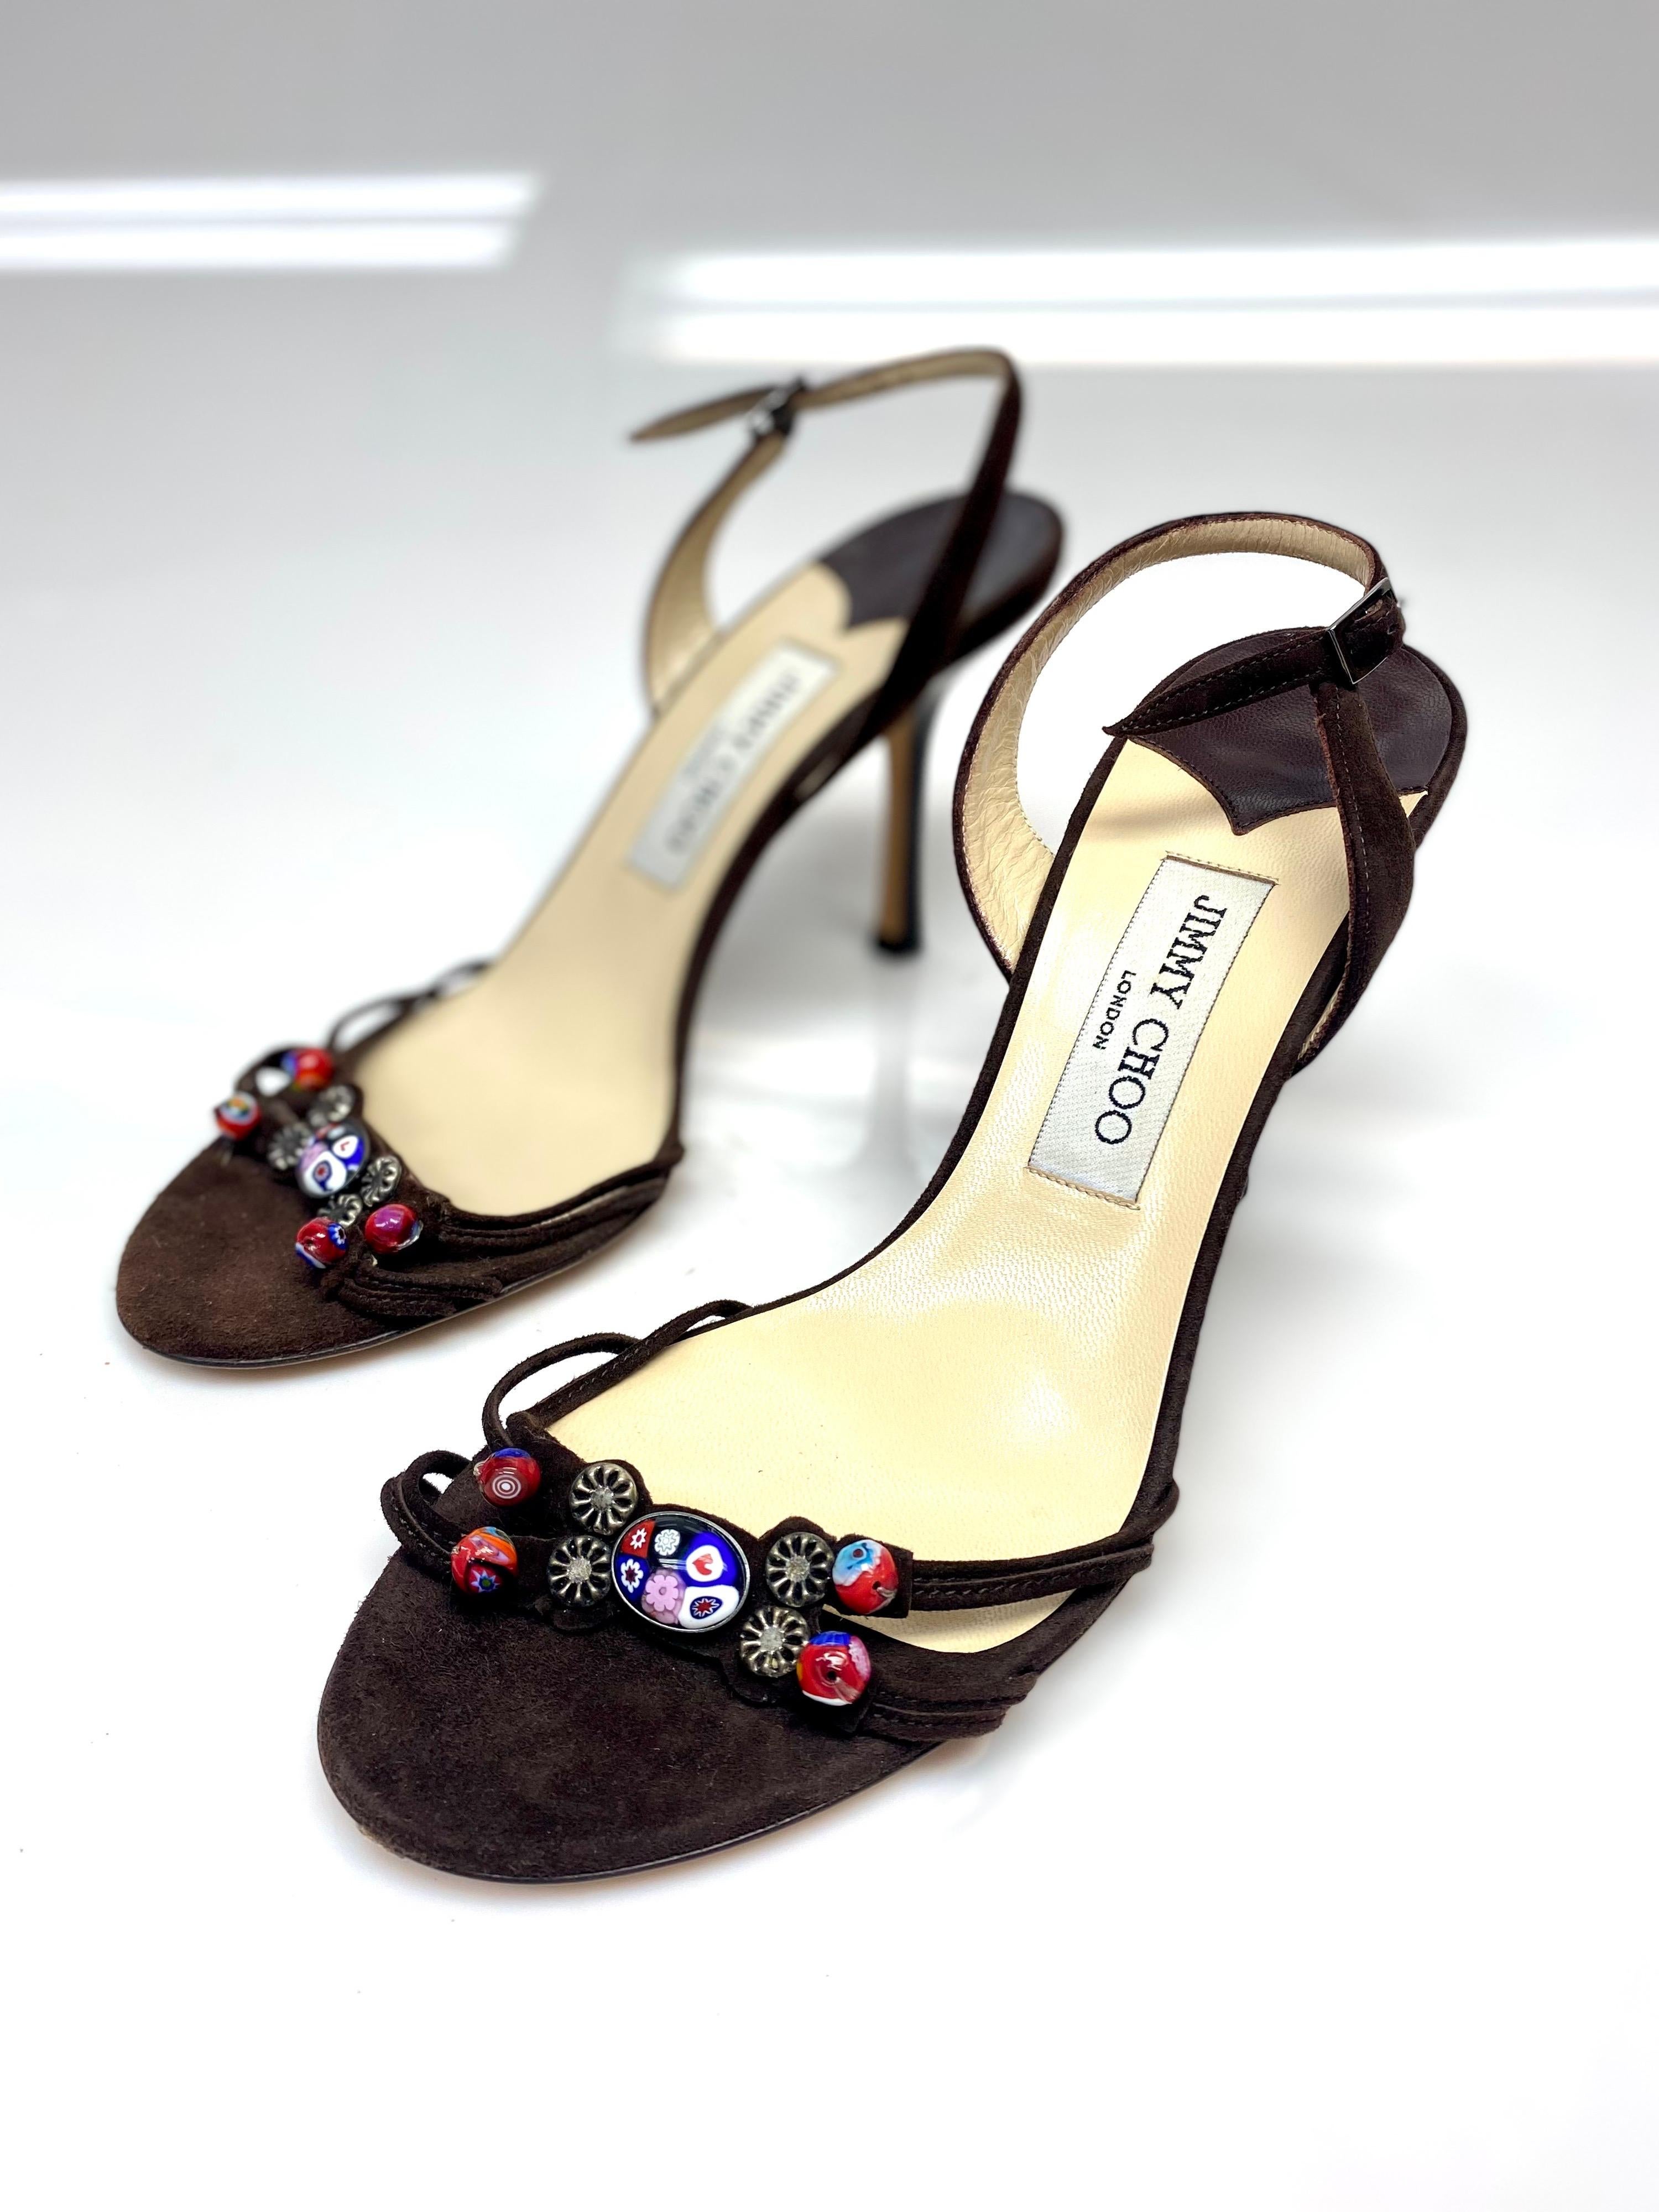 Jimmy Choo Brown Suede Slingback Sandal with Beaded Detailing Size 39 In Good Condition For Sale In West Palm Beach, FL